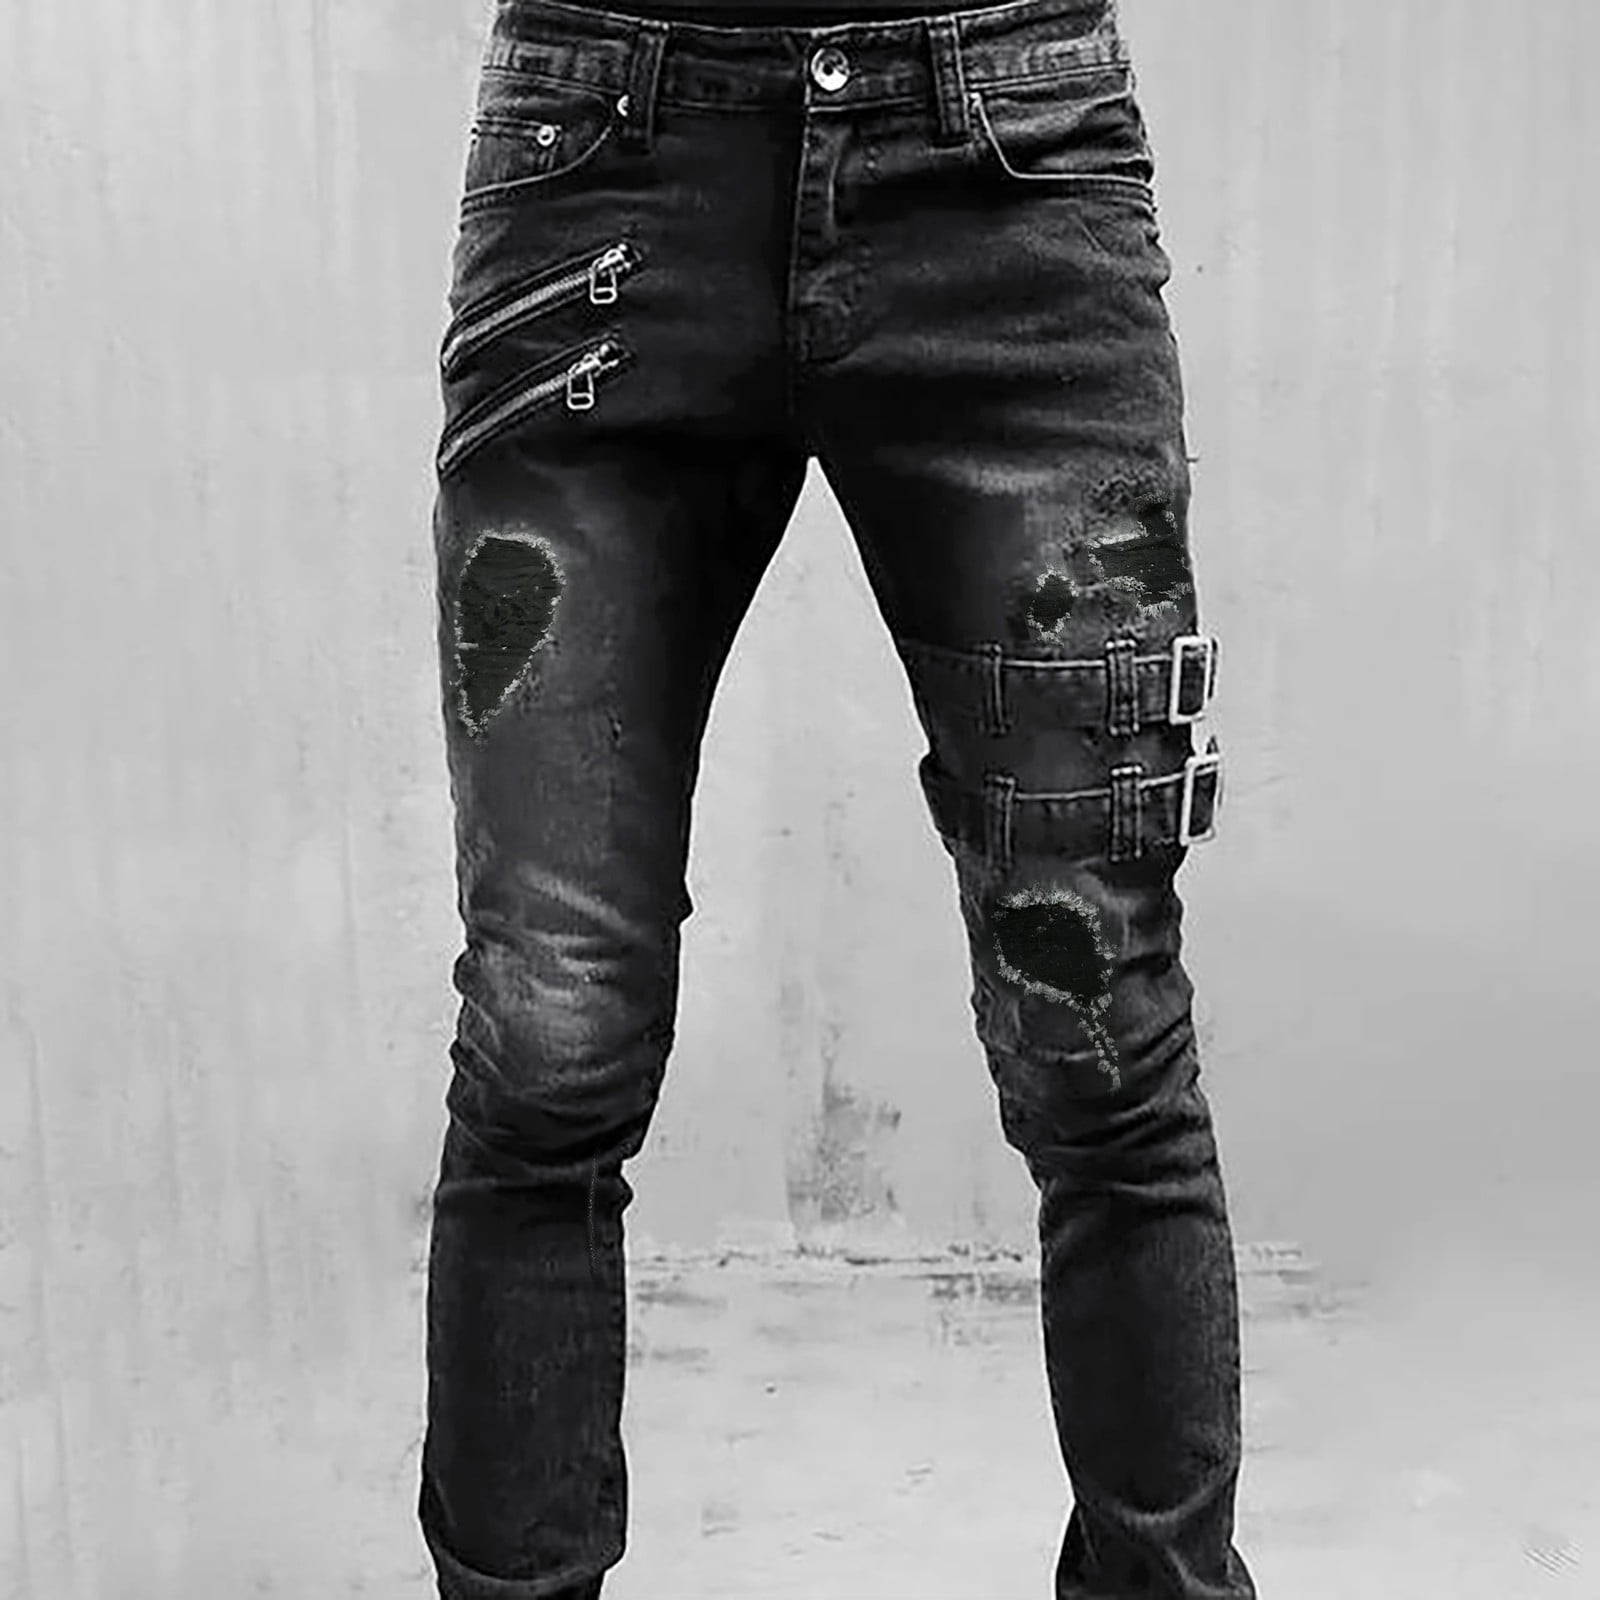 Men's grey ripped jeans | Trousers and pants for men | Ripped jeans men,  Cool outfits for men, Men fashion casual outfits